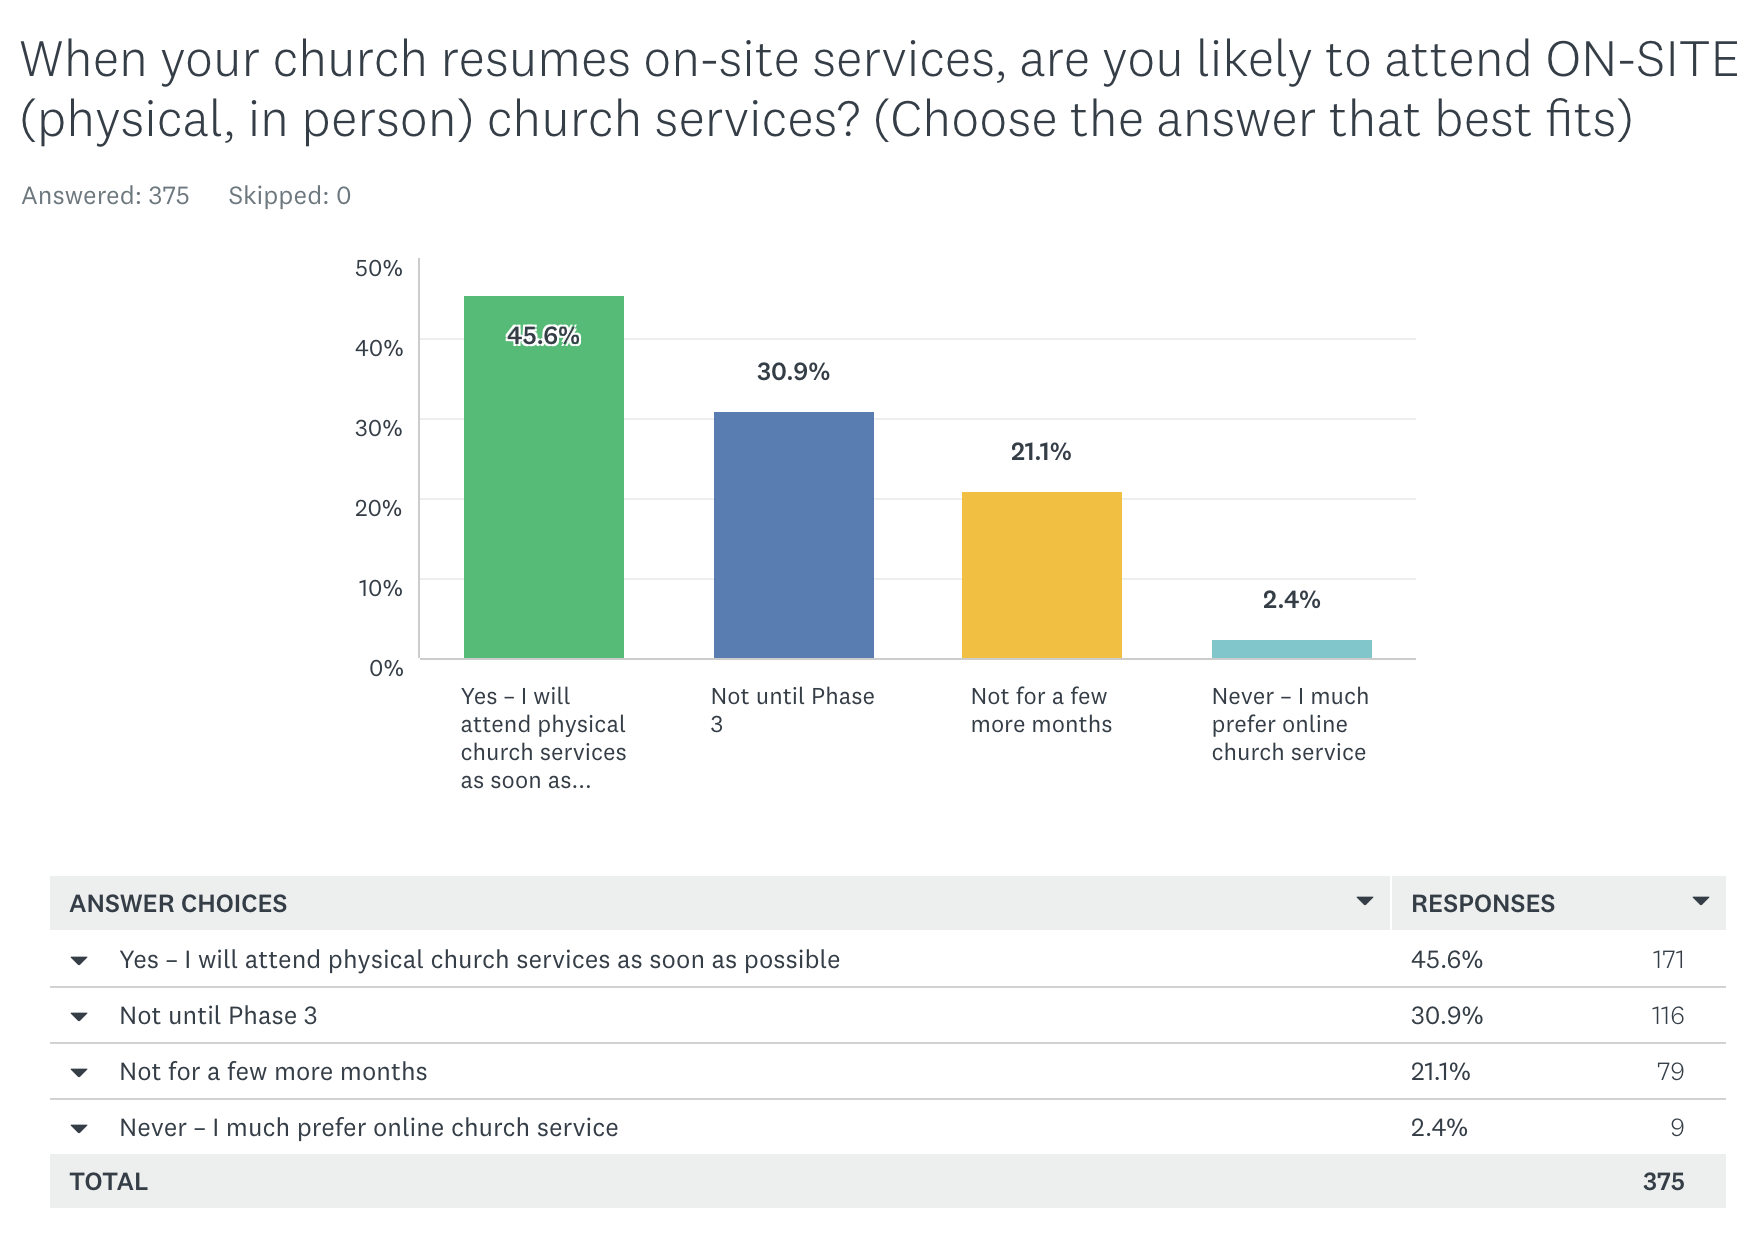 Will you attend on-site church services upon resumption?